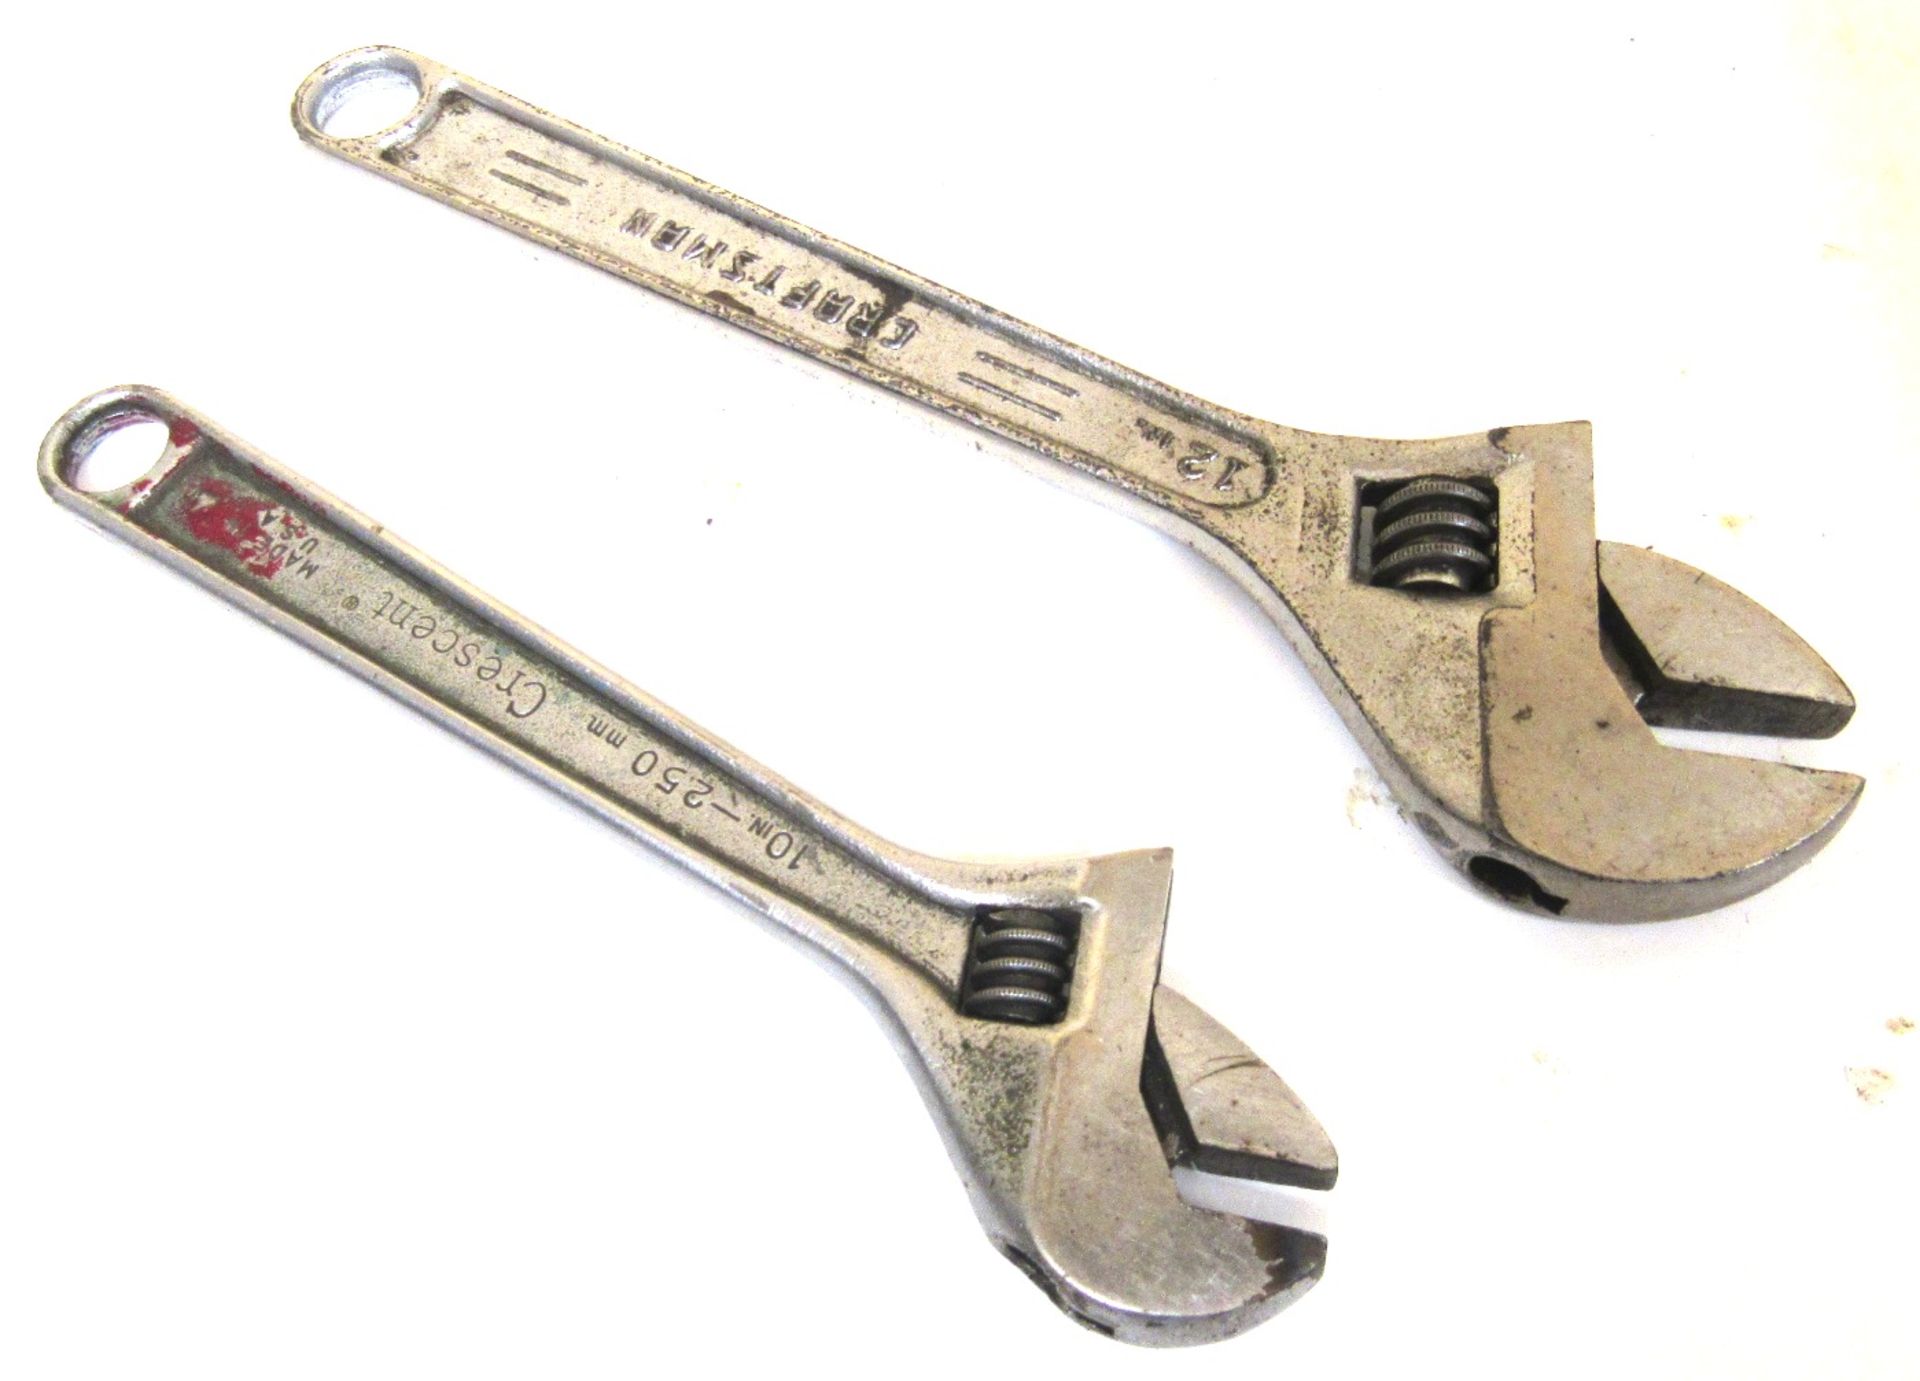 12" & 10" Adjustable Cresent Wrenches